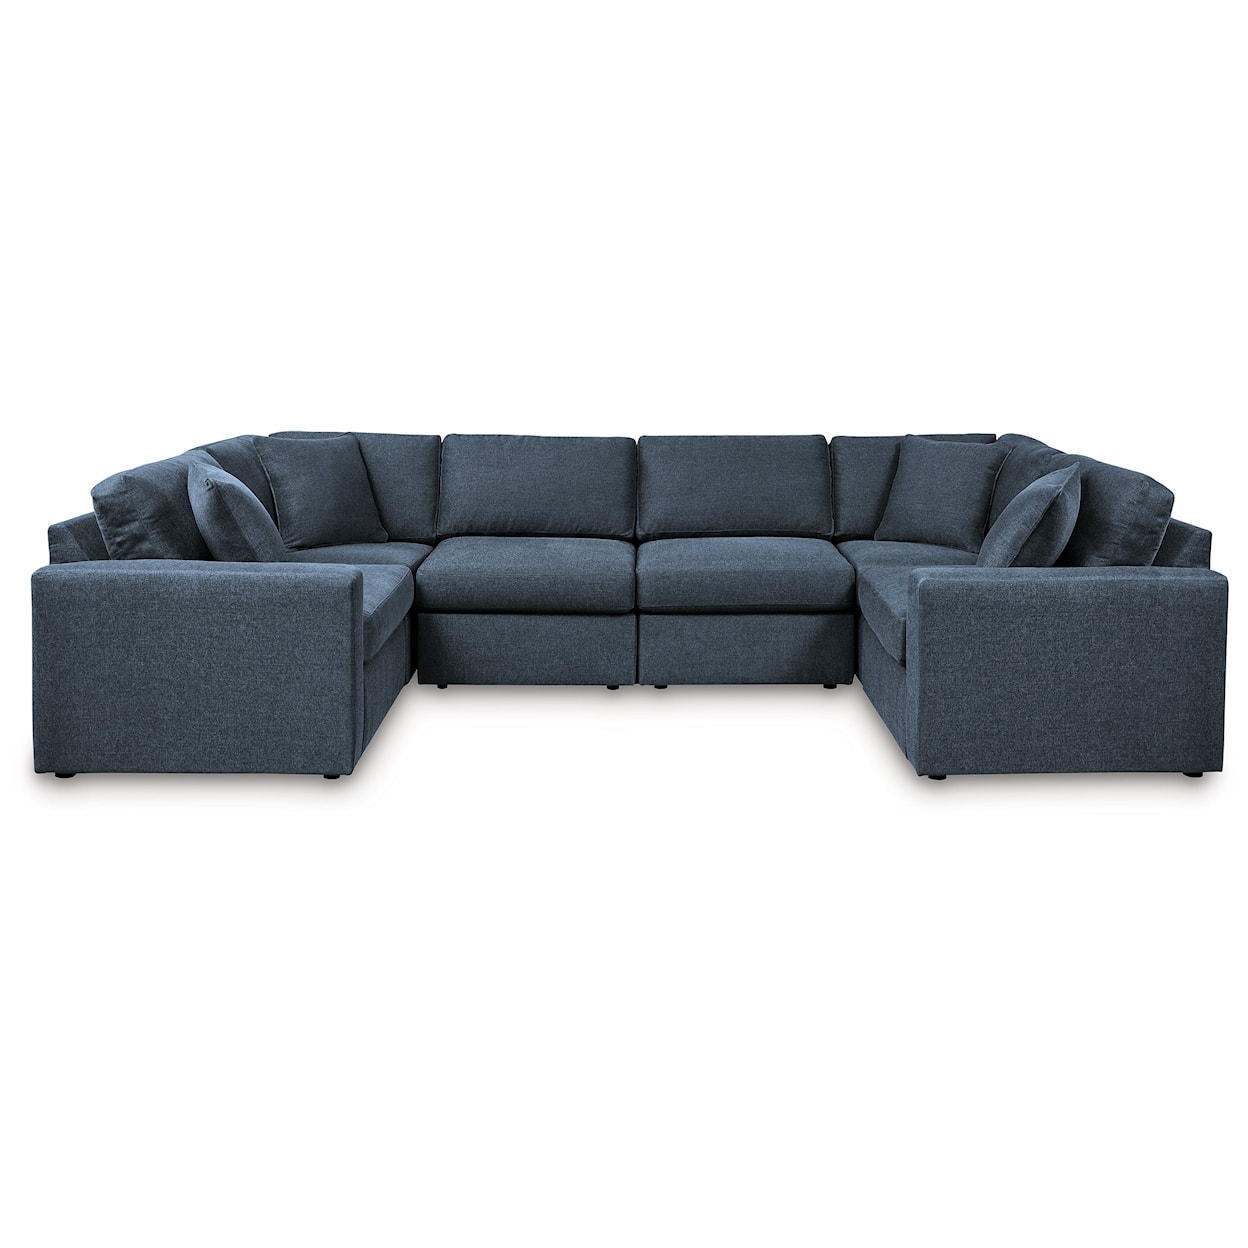 Signature Design by Ashley Modmax 6-Piece Sectional